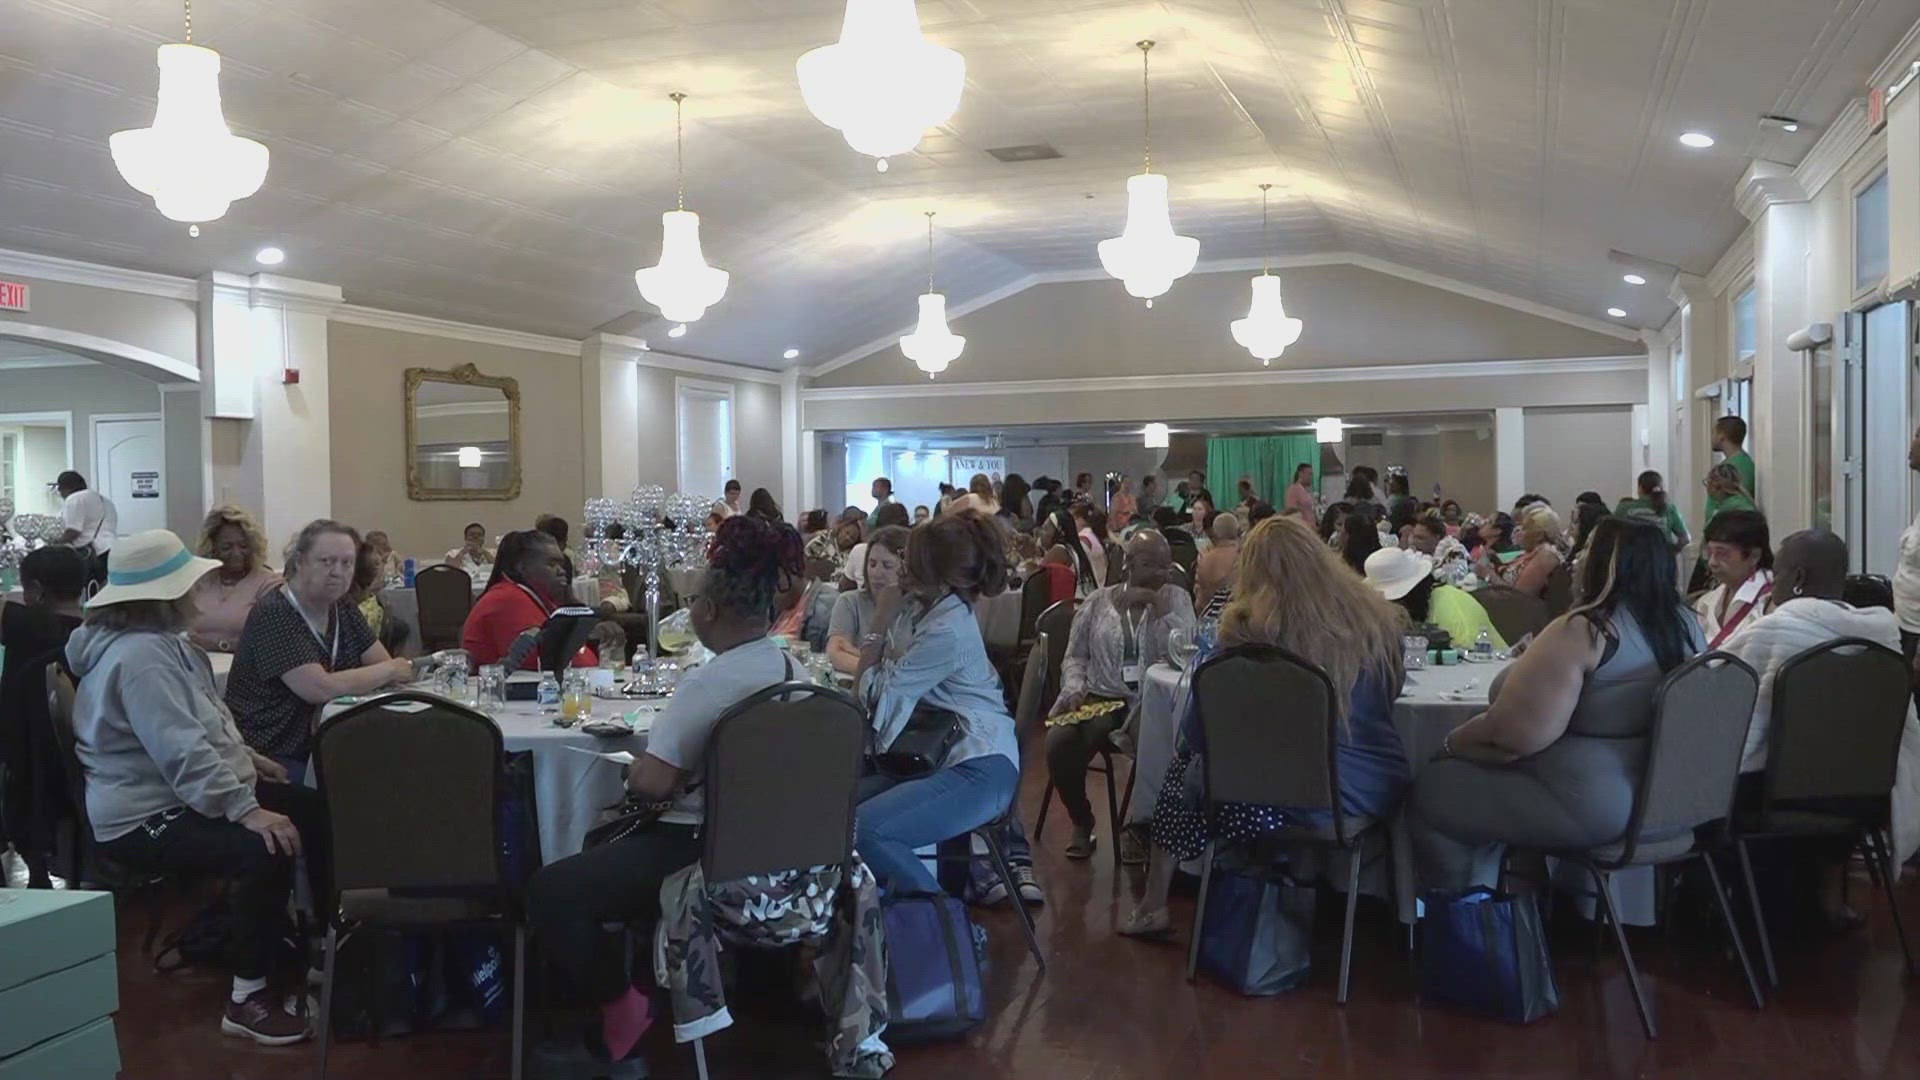 A mother's day event held for women experiencing homelessness or other hardships.